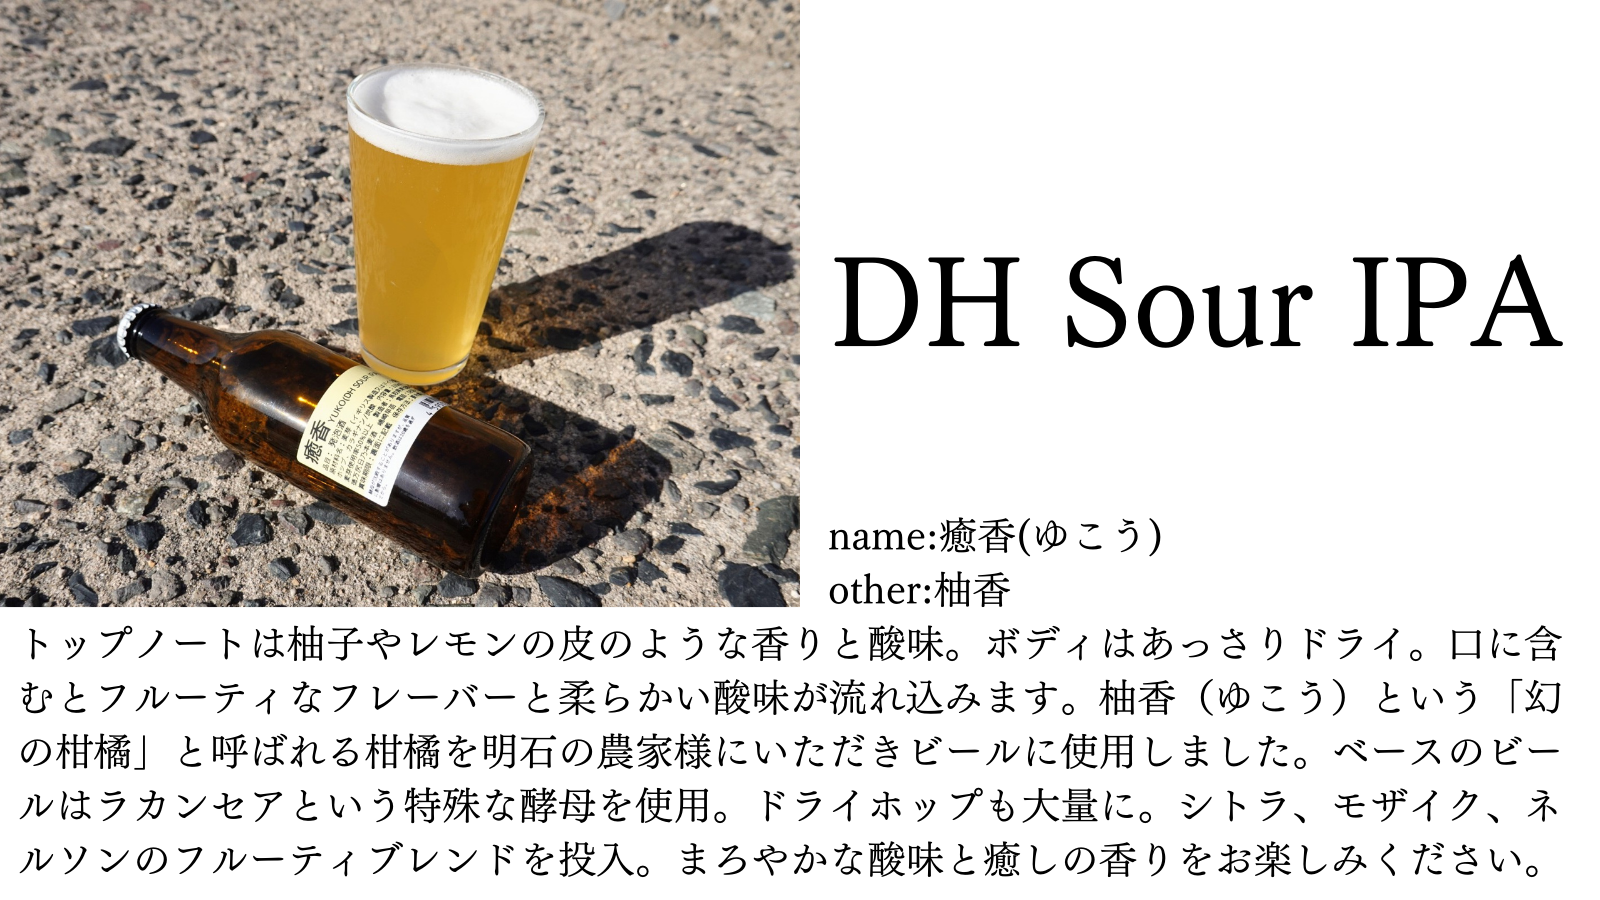 dh sour ipa.png